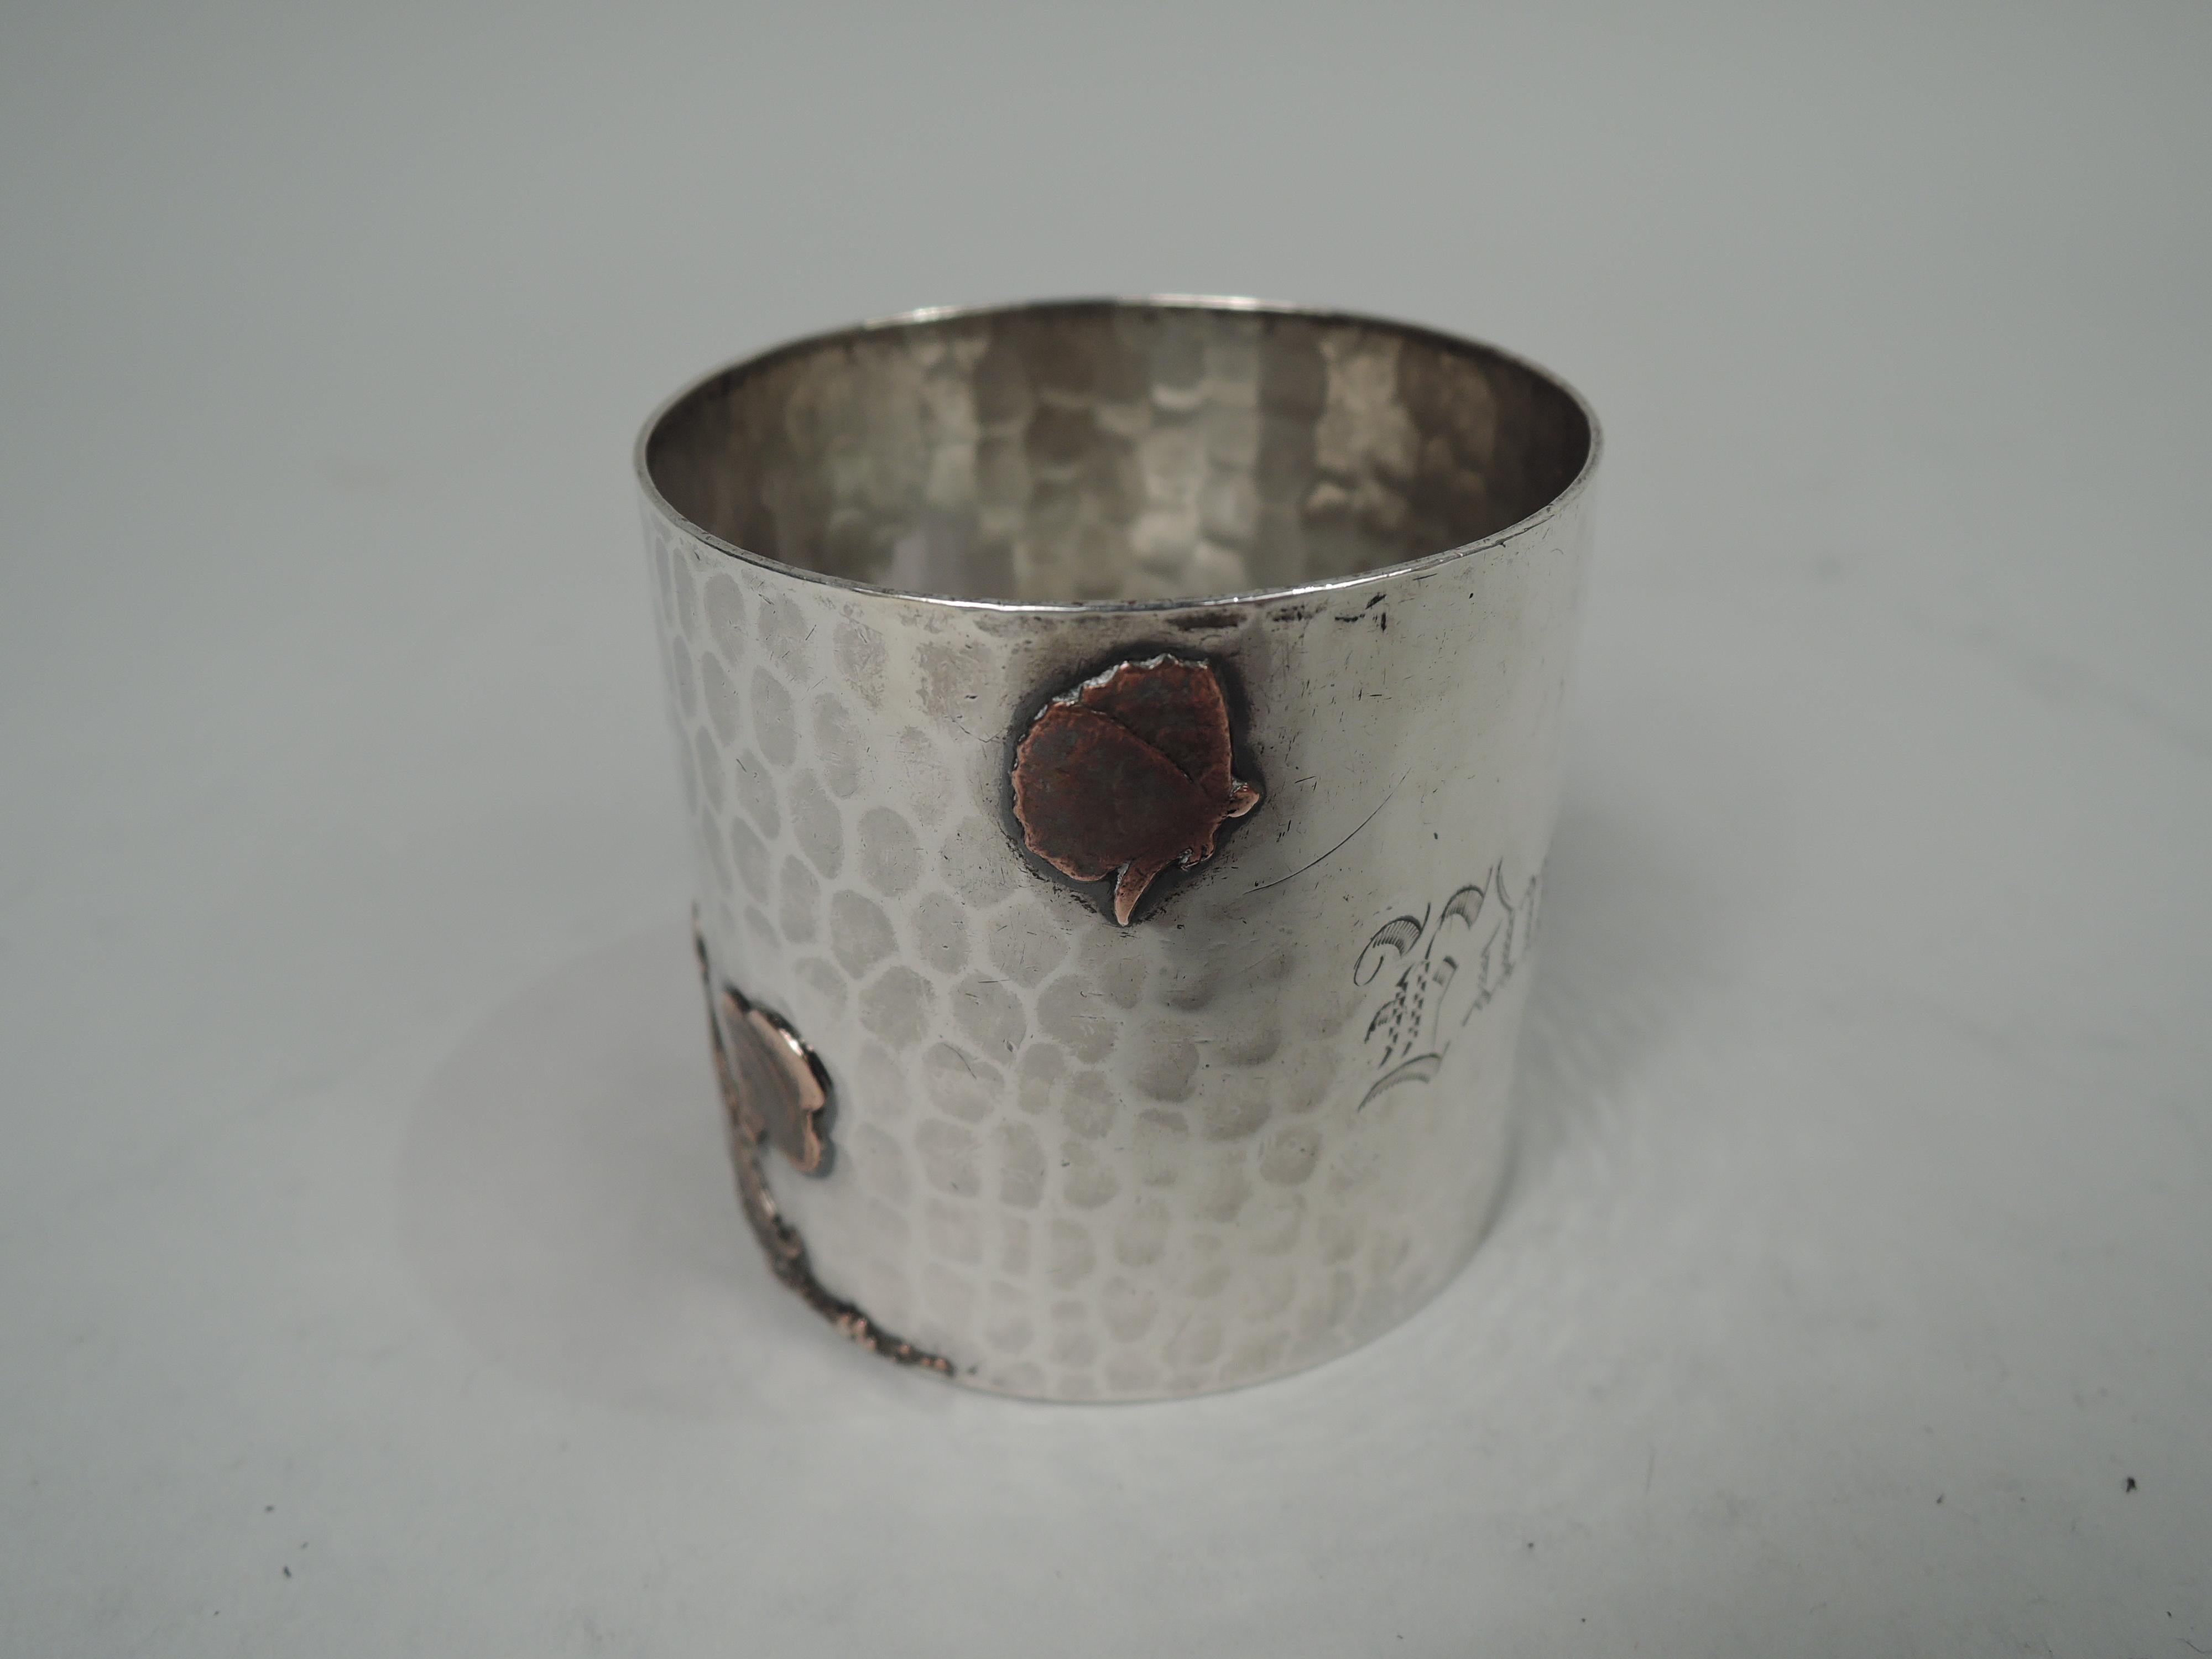 Japonesque mixed metal napkin ring. Made by Gorham in Providence in 1882. Hand-hammered sterling silver ring applied with cooper ornament: A man in pointy hat is seated on the ground, smoking while a small dog approaches from behind, interrupting